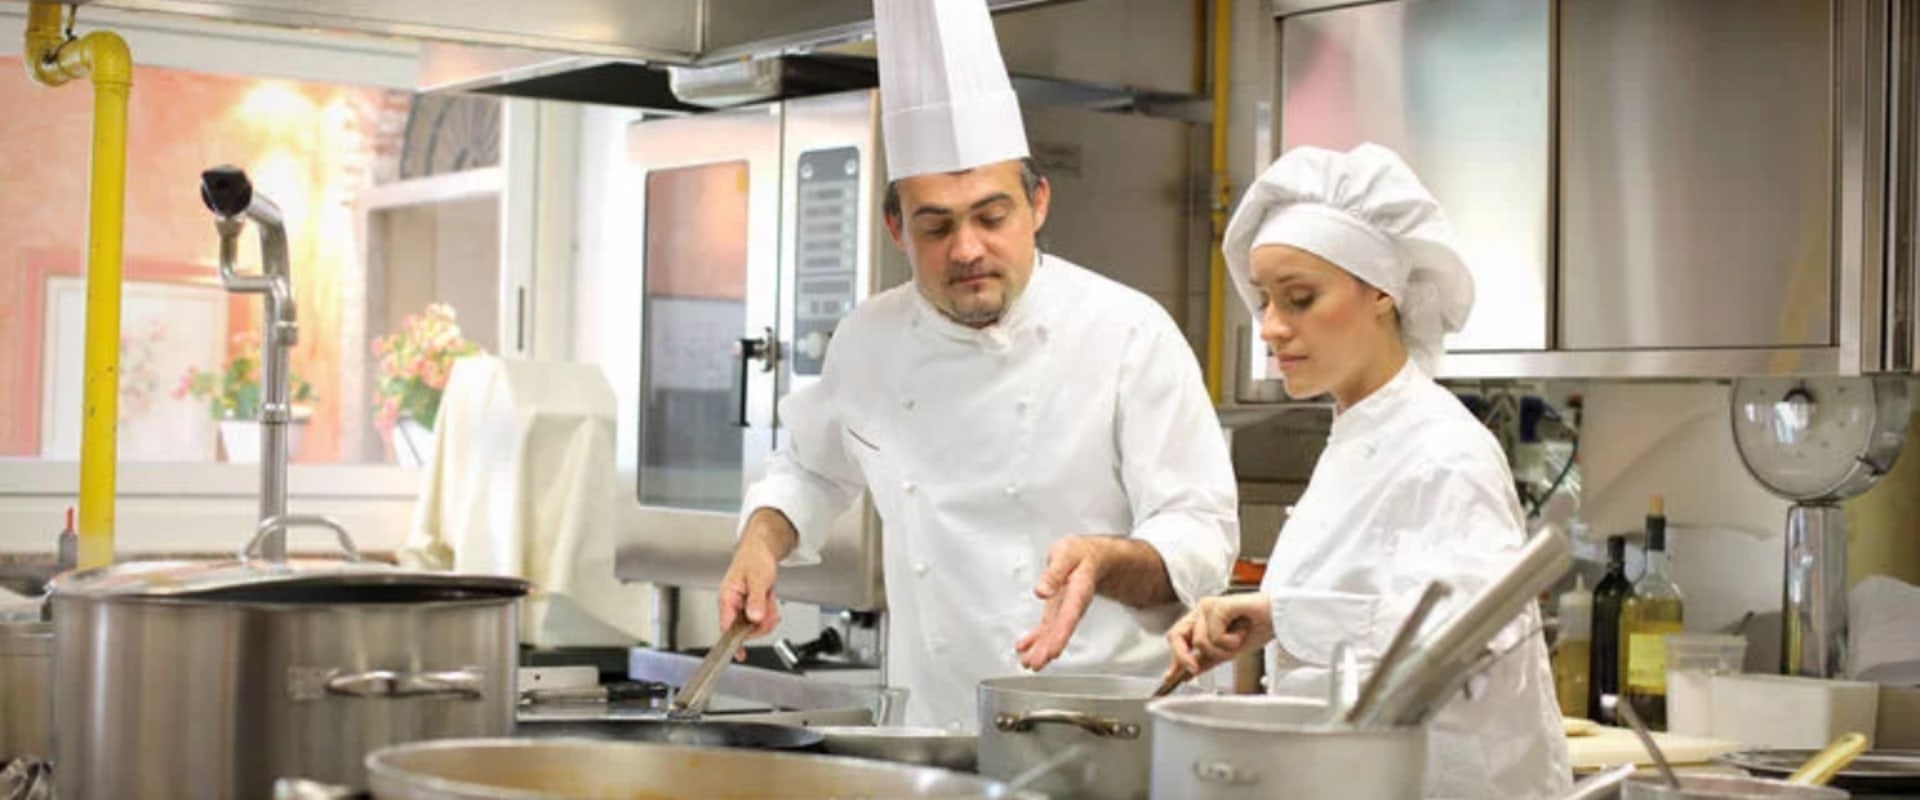 Culinary Schools in St. Louis, Missouri: A Guide for Aspiring Chefs